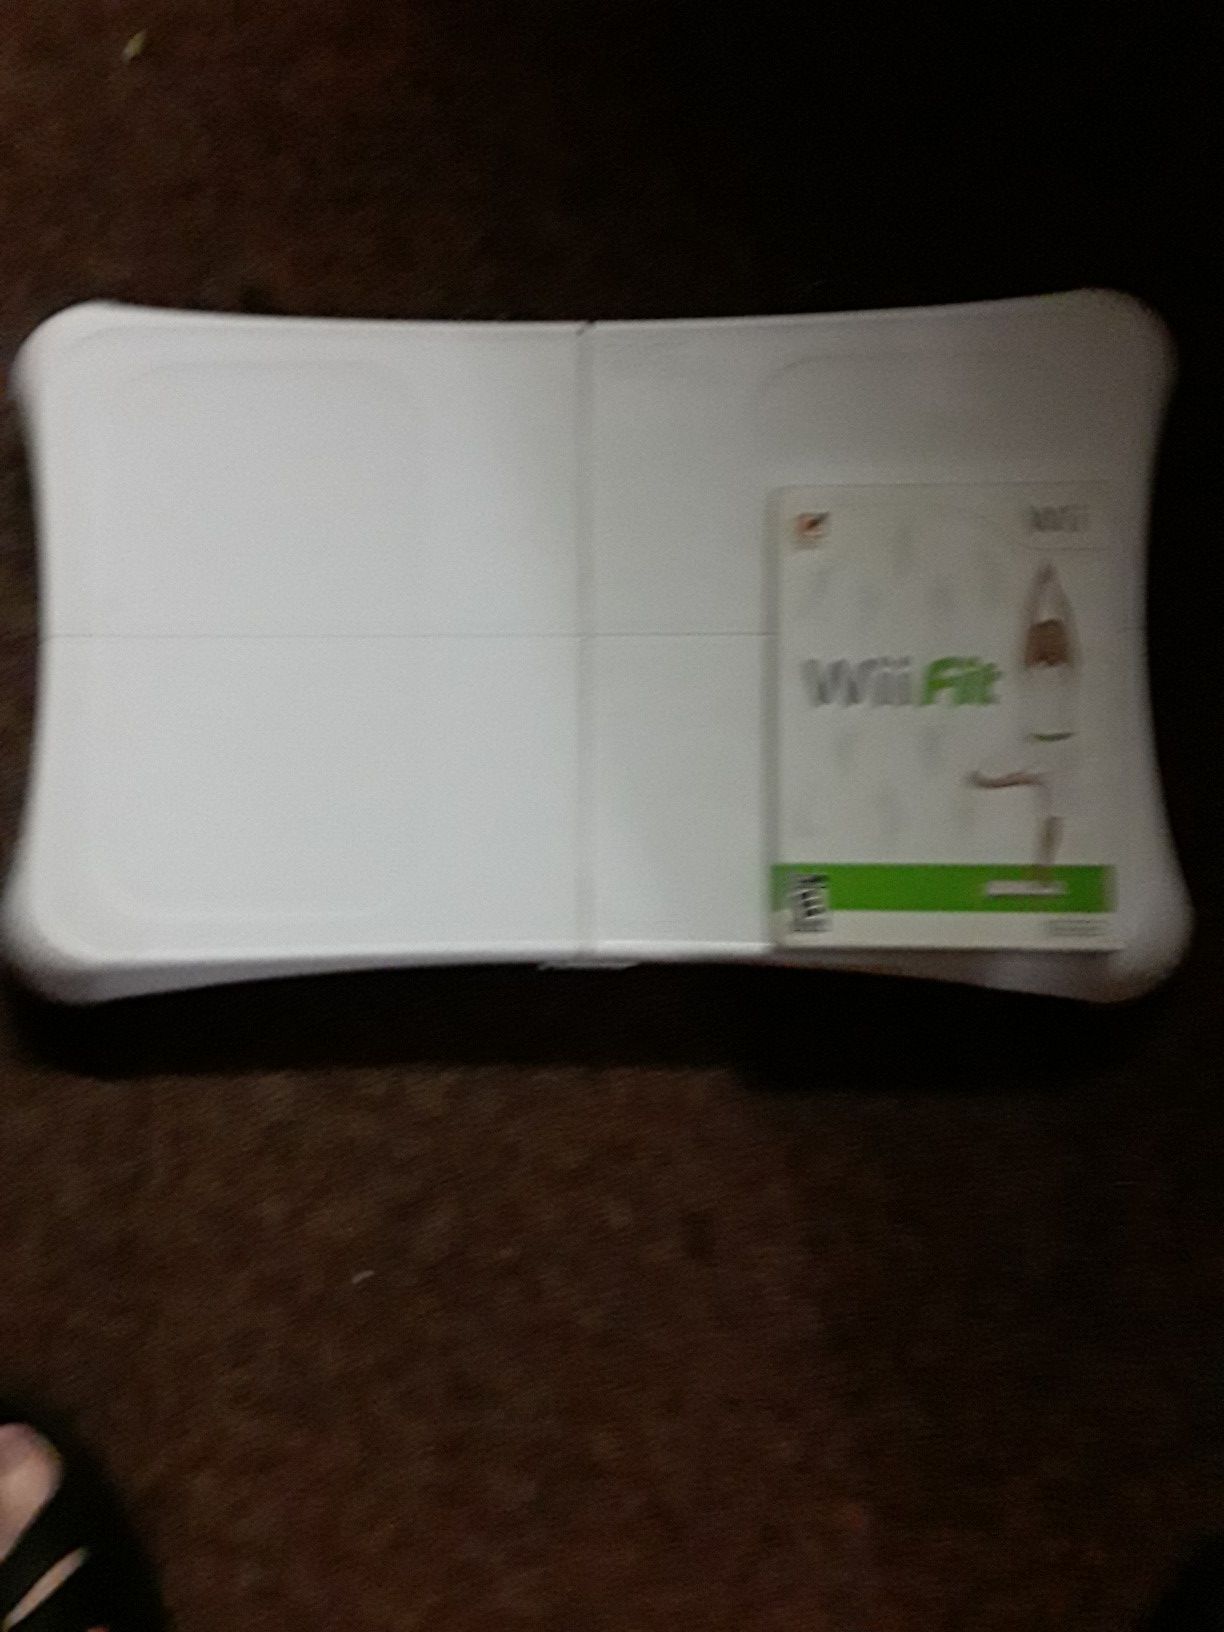 Wii fit game with balance board